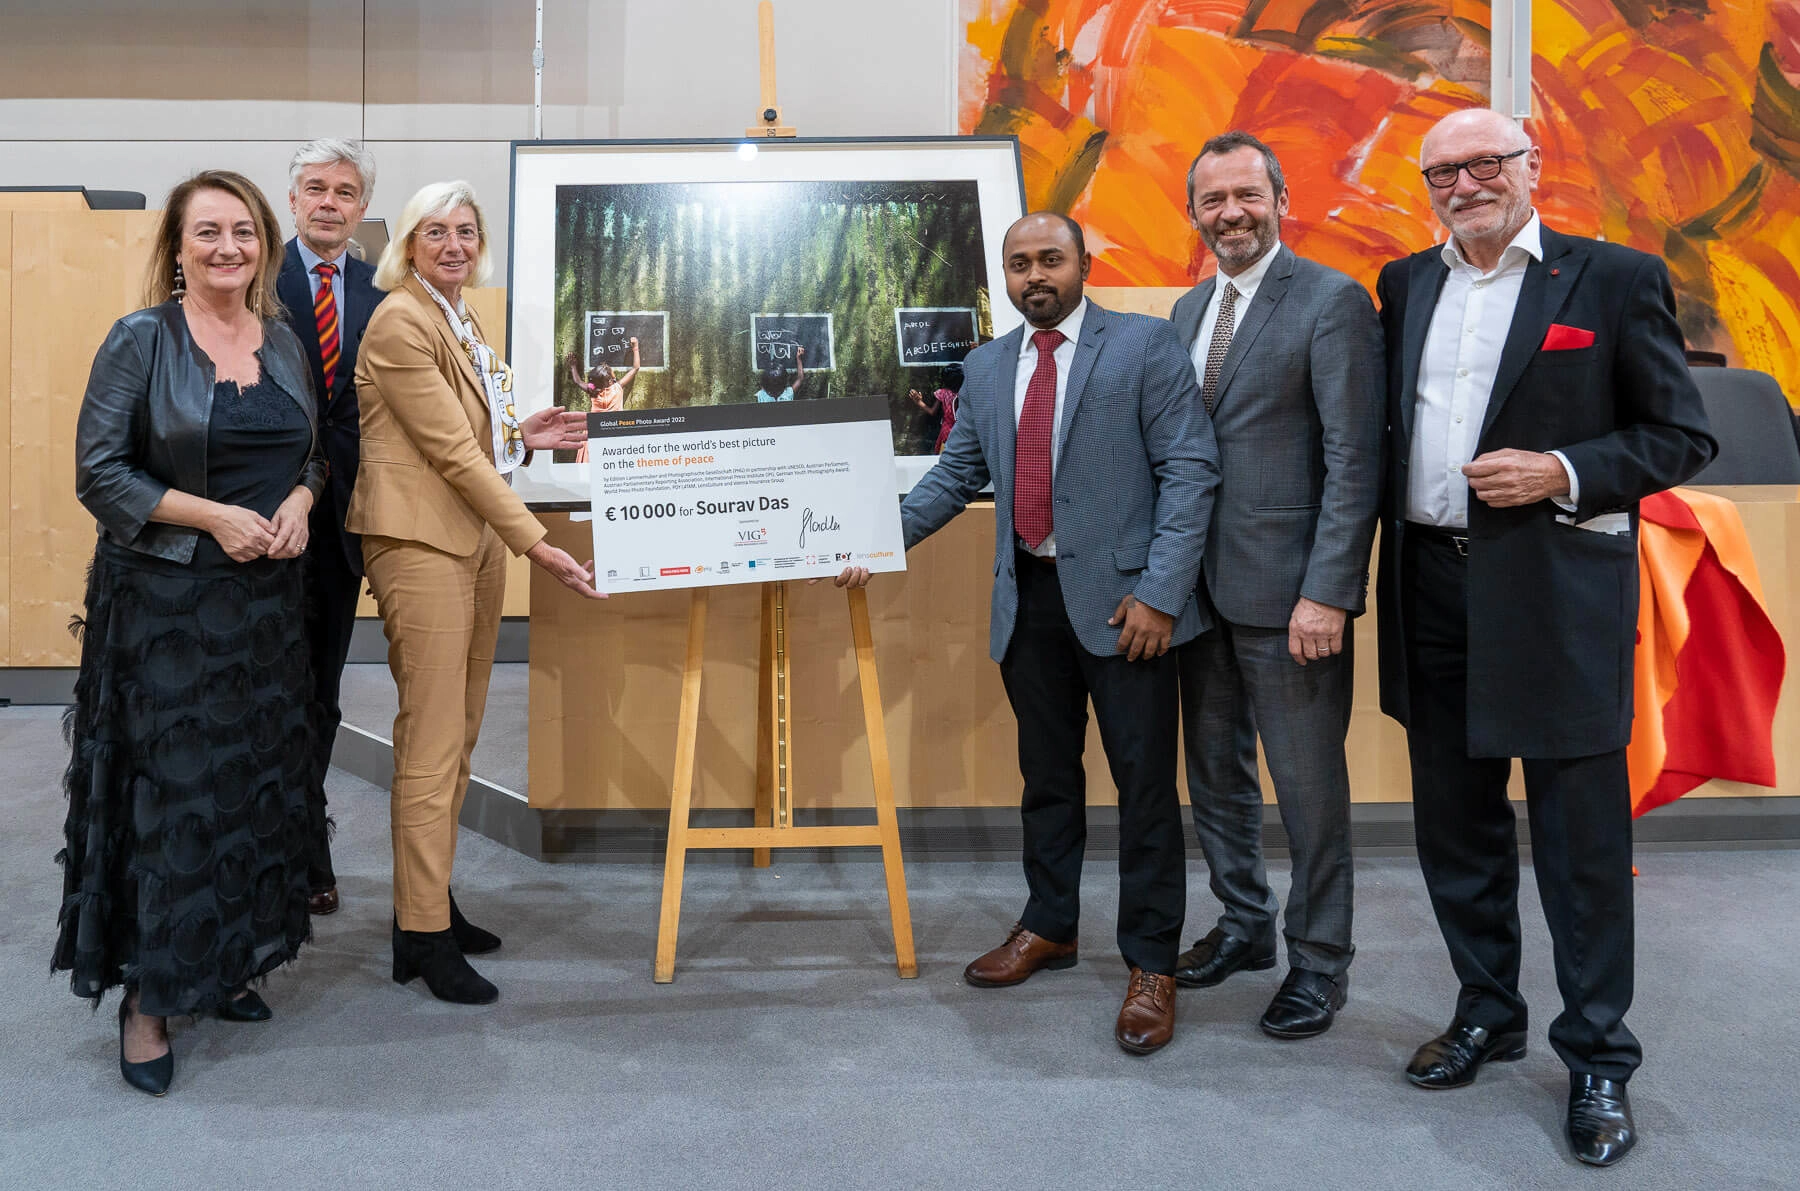 Award ceremony of the Global Peace Photo Award 2022. Presentation of the check by CEO Elisabeth Stadler